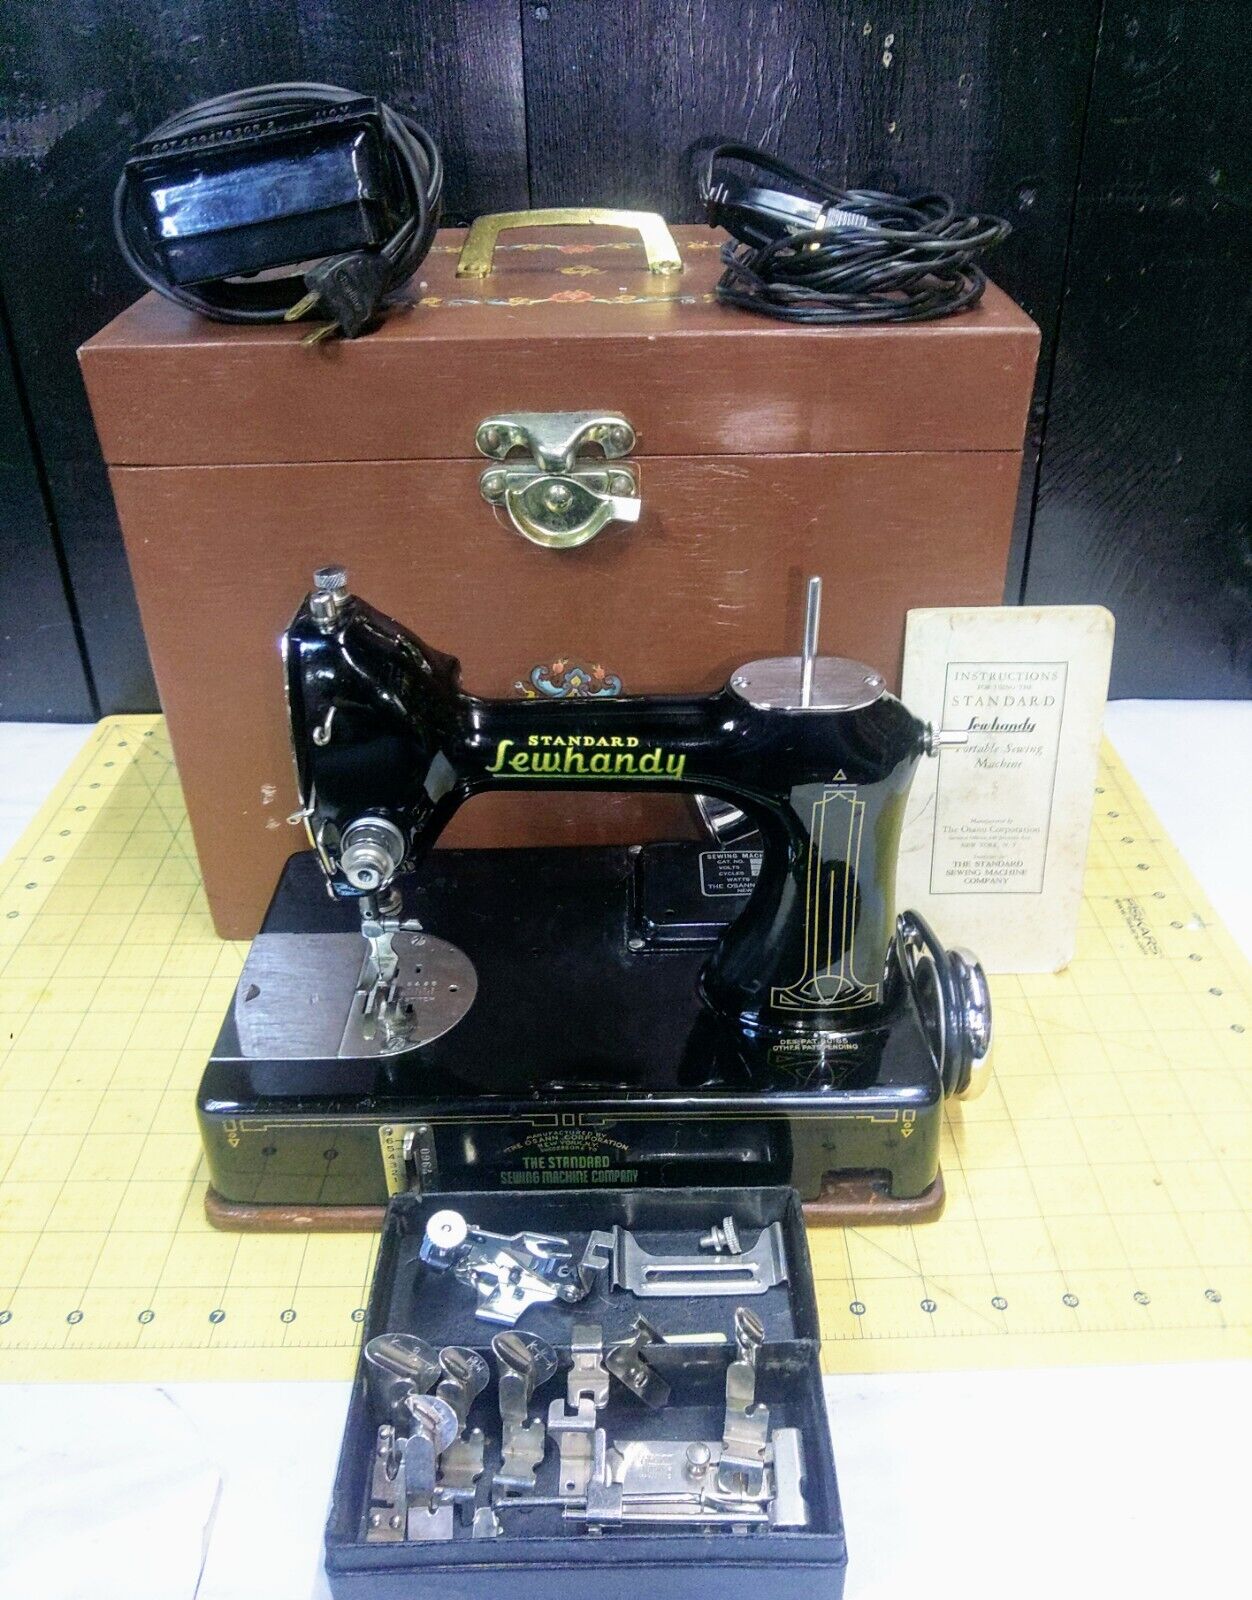 Standard SewHandy FeatherWeight Sewing Machine w/Case & Accs Osann Co GE Model A